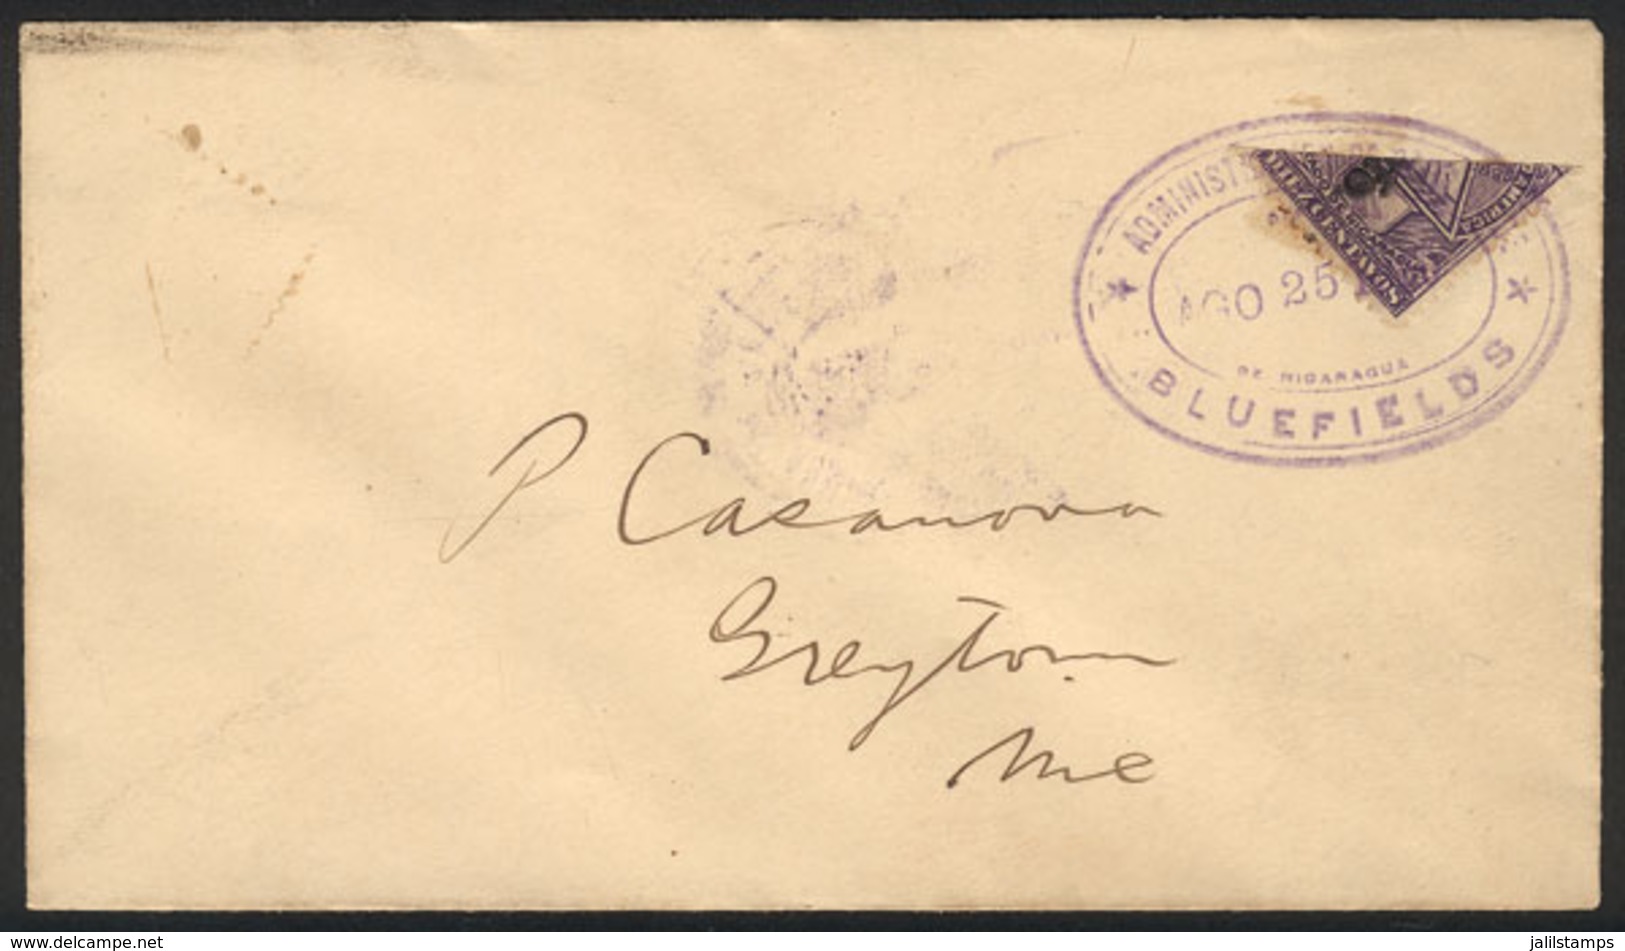 NICARAGUA: Cover Sent From BLUEFIELDS To Greytown On 25/AU/1899 Franked With 5c. (10c. Stamp Of 1899 With "TELÉGRAFO" Ov - Nicaragua